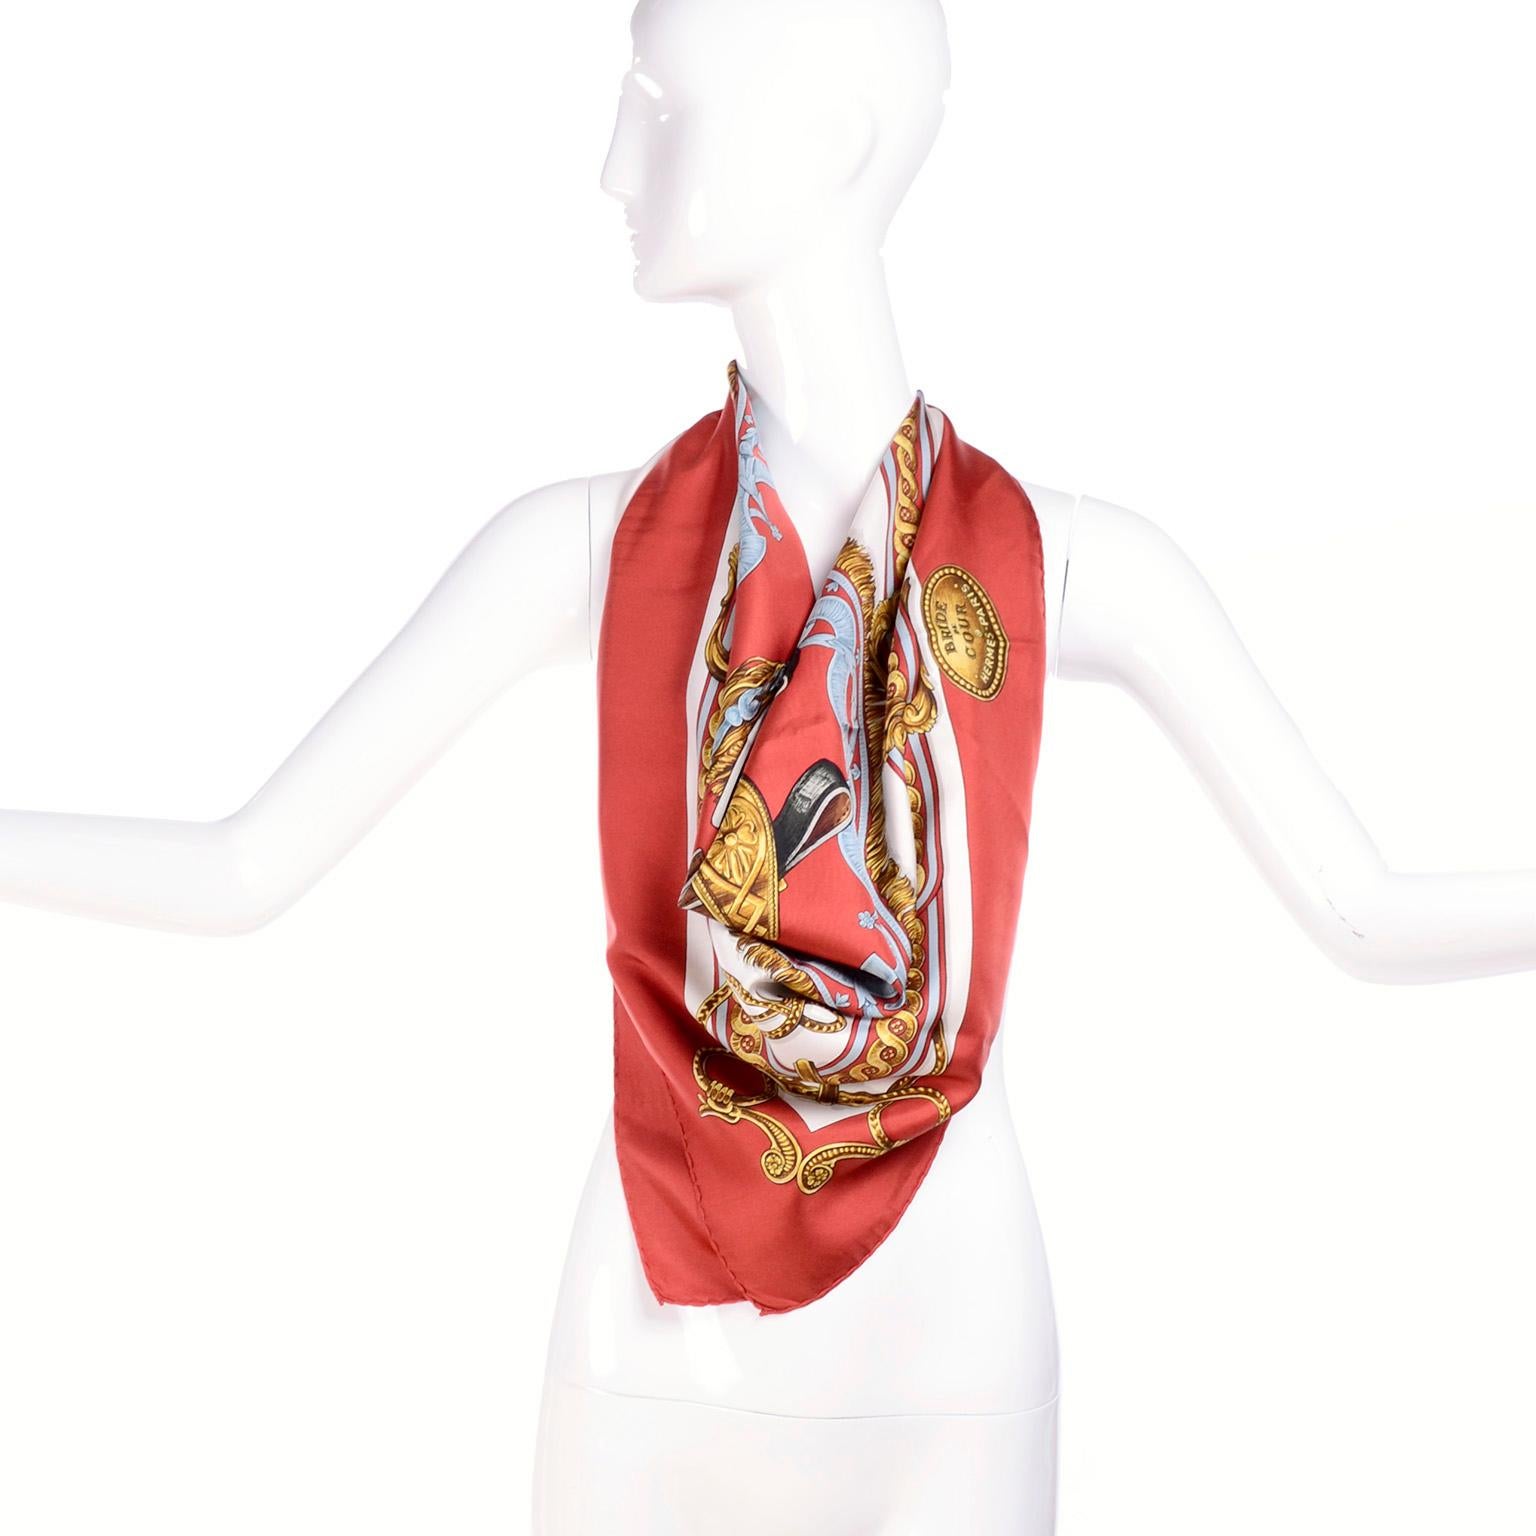 This beautiful vintage Hermes equestrian scarf was designed by Francoise de la Perriere in 1969. The scarf is in beautiful shades of rust red and blue with some yellow gold and it measures 35.